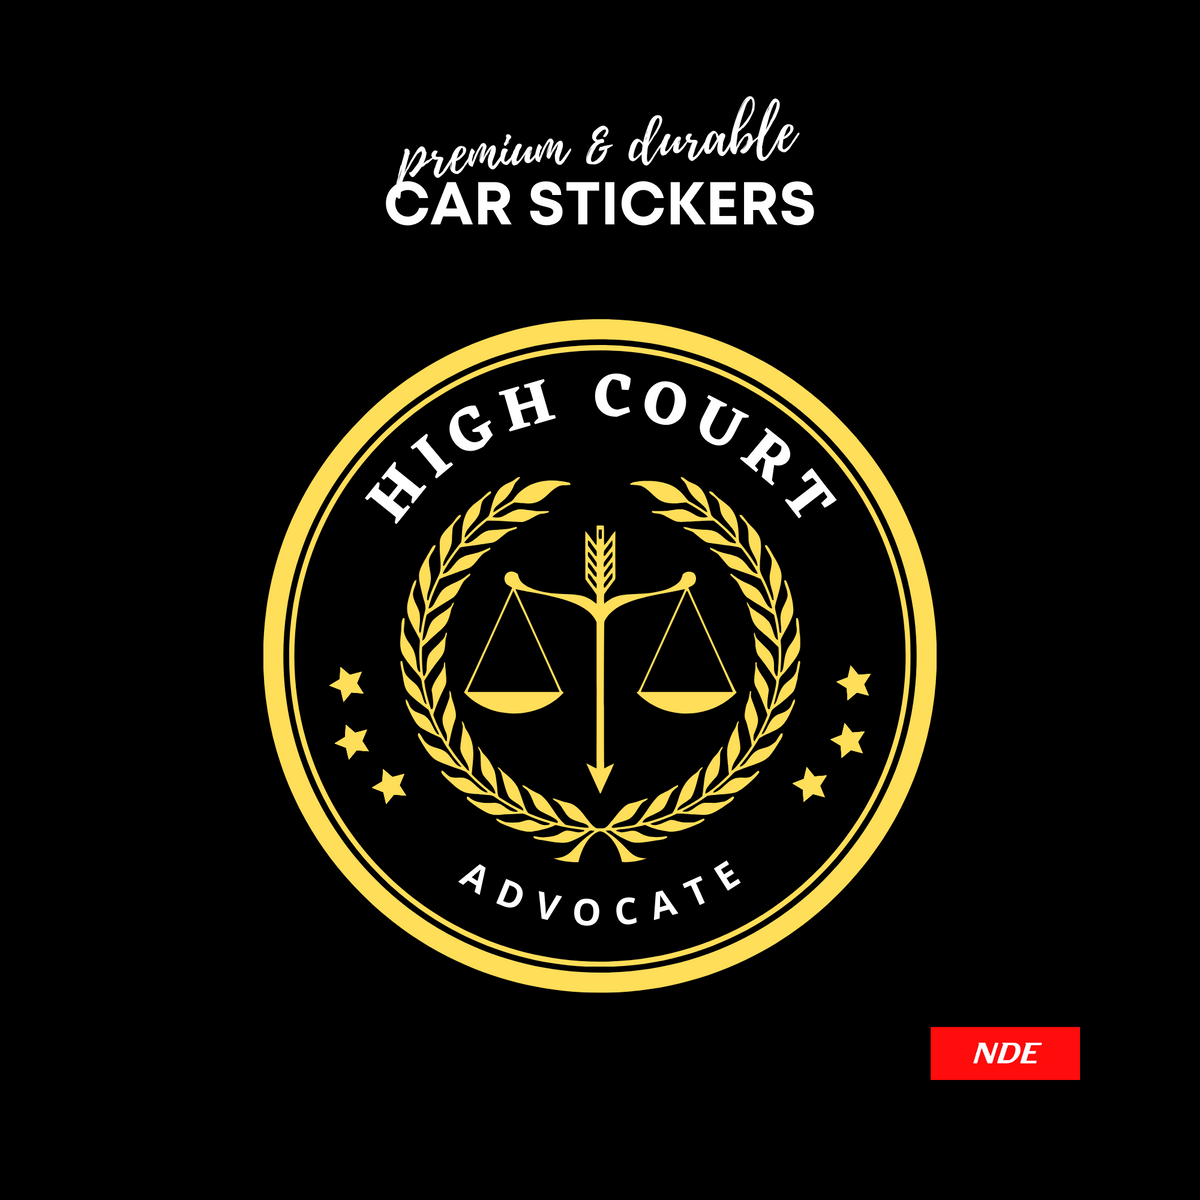 Legal Center Or Law Advocate Icon With Symbol Of Justice Scales For Rights  Lawyer Or Jurisdiction Advocacy. Juridical Emblem For Advocate Or Attorney  Office, Counsel, Notary Company Or Judge Prosecution Court Royalty